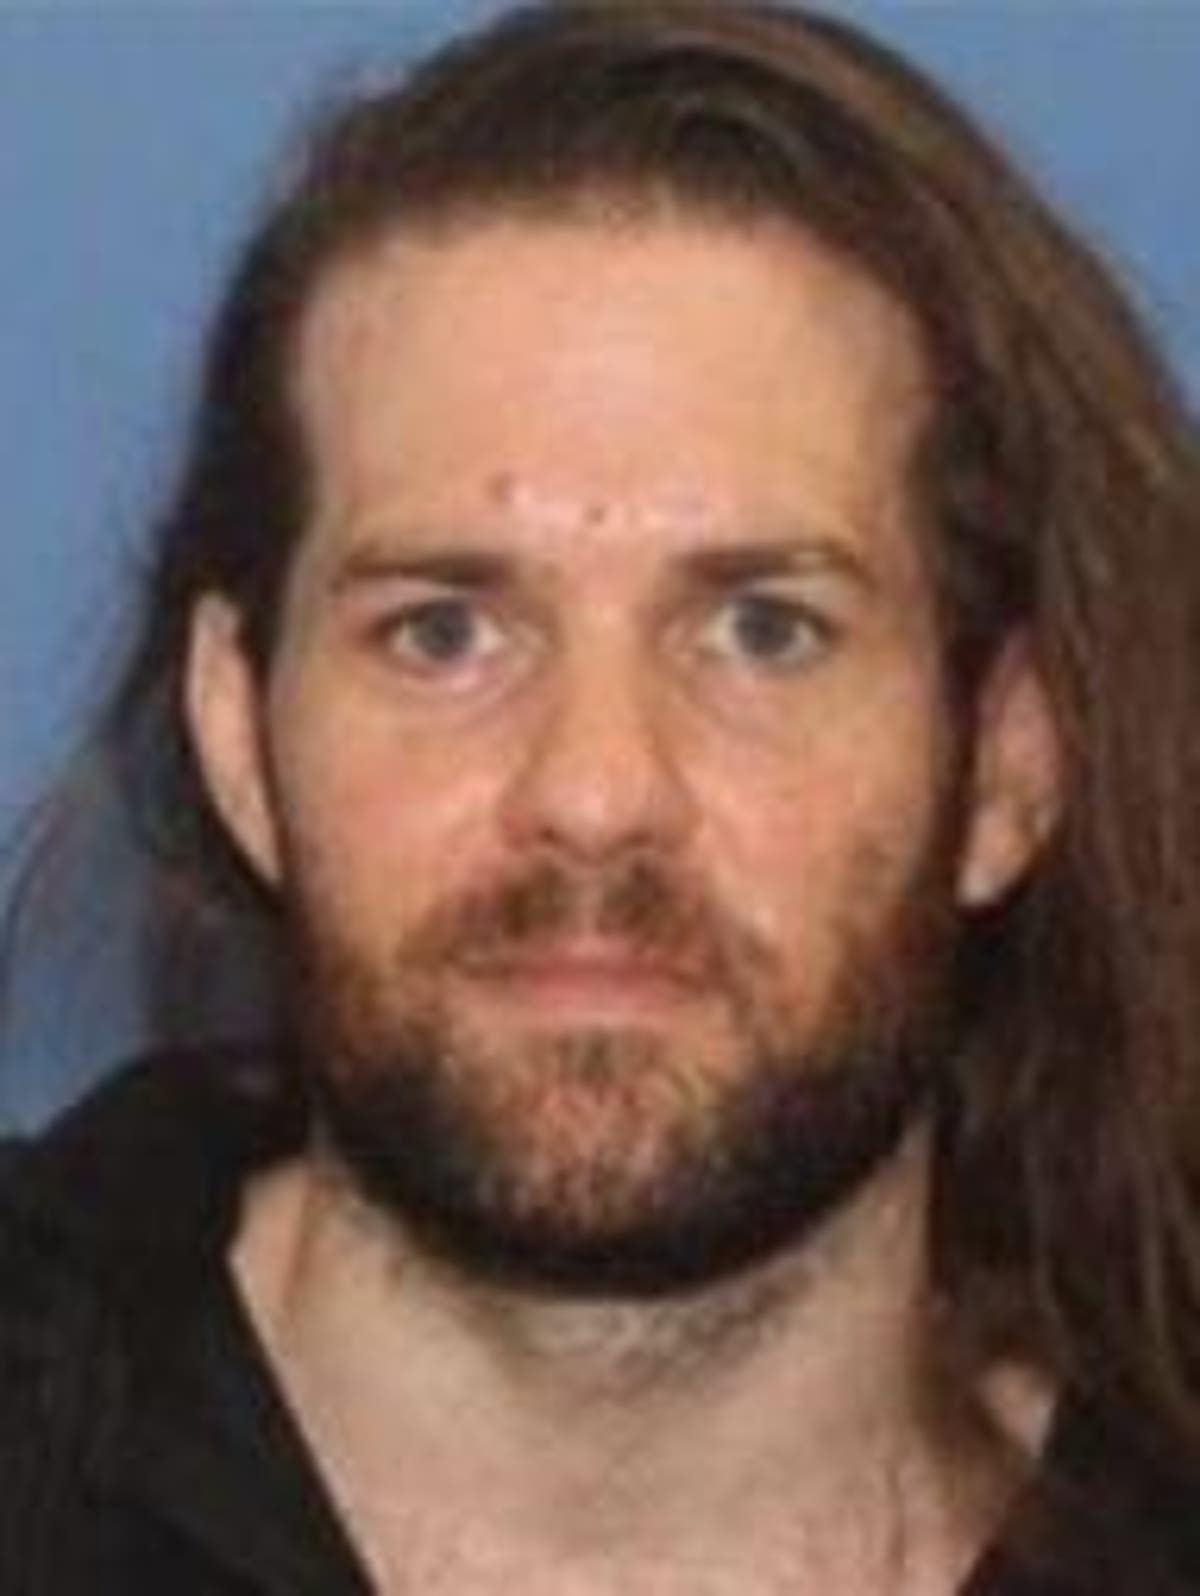 Oregon man sought by police for kidnap may be using dating apps to find more victims, police warn